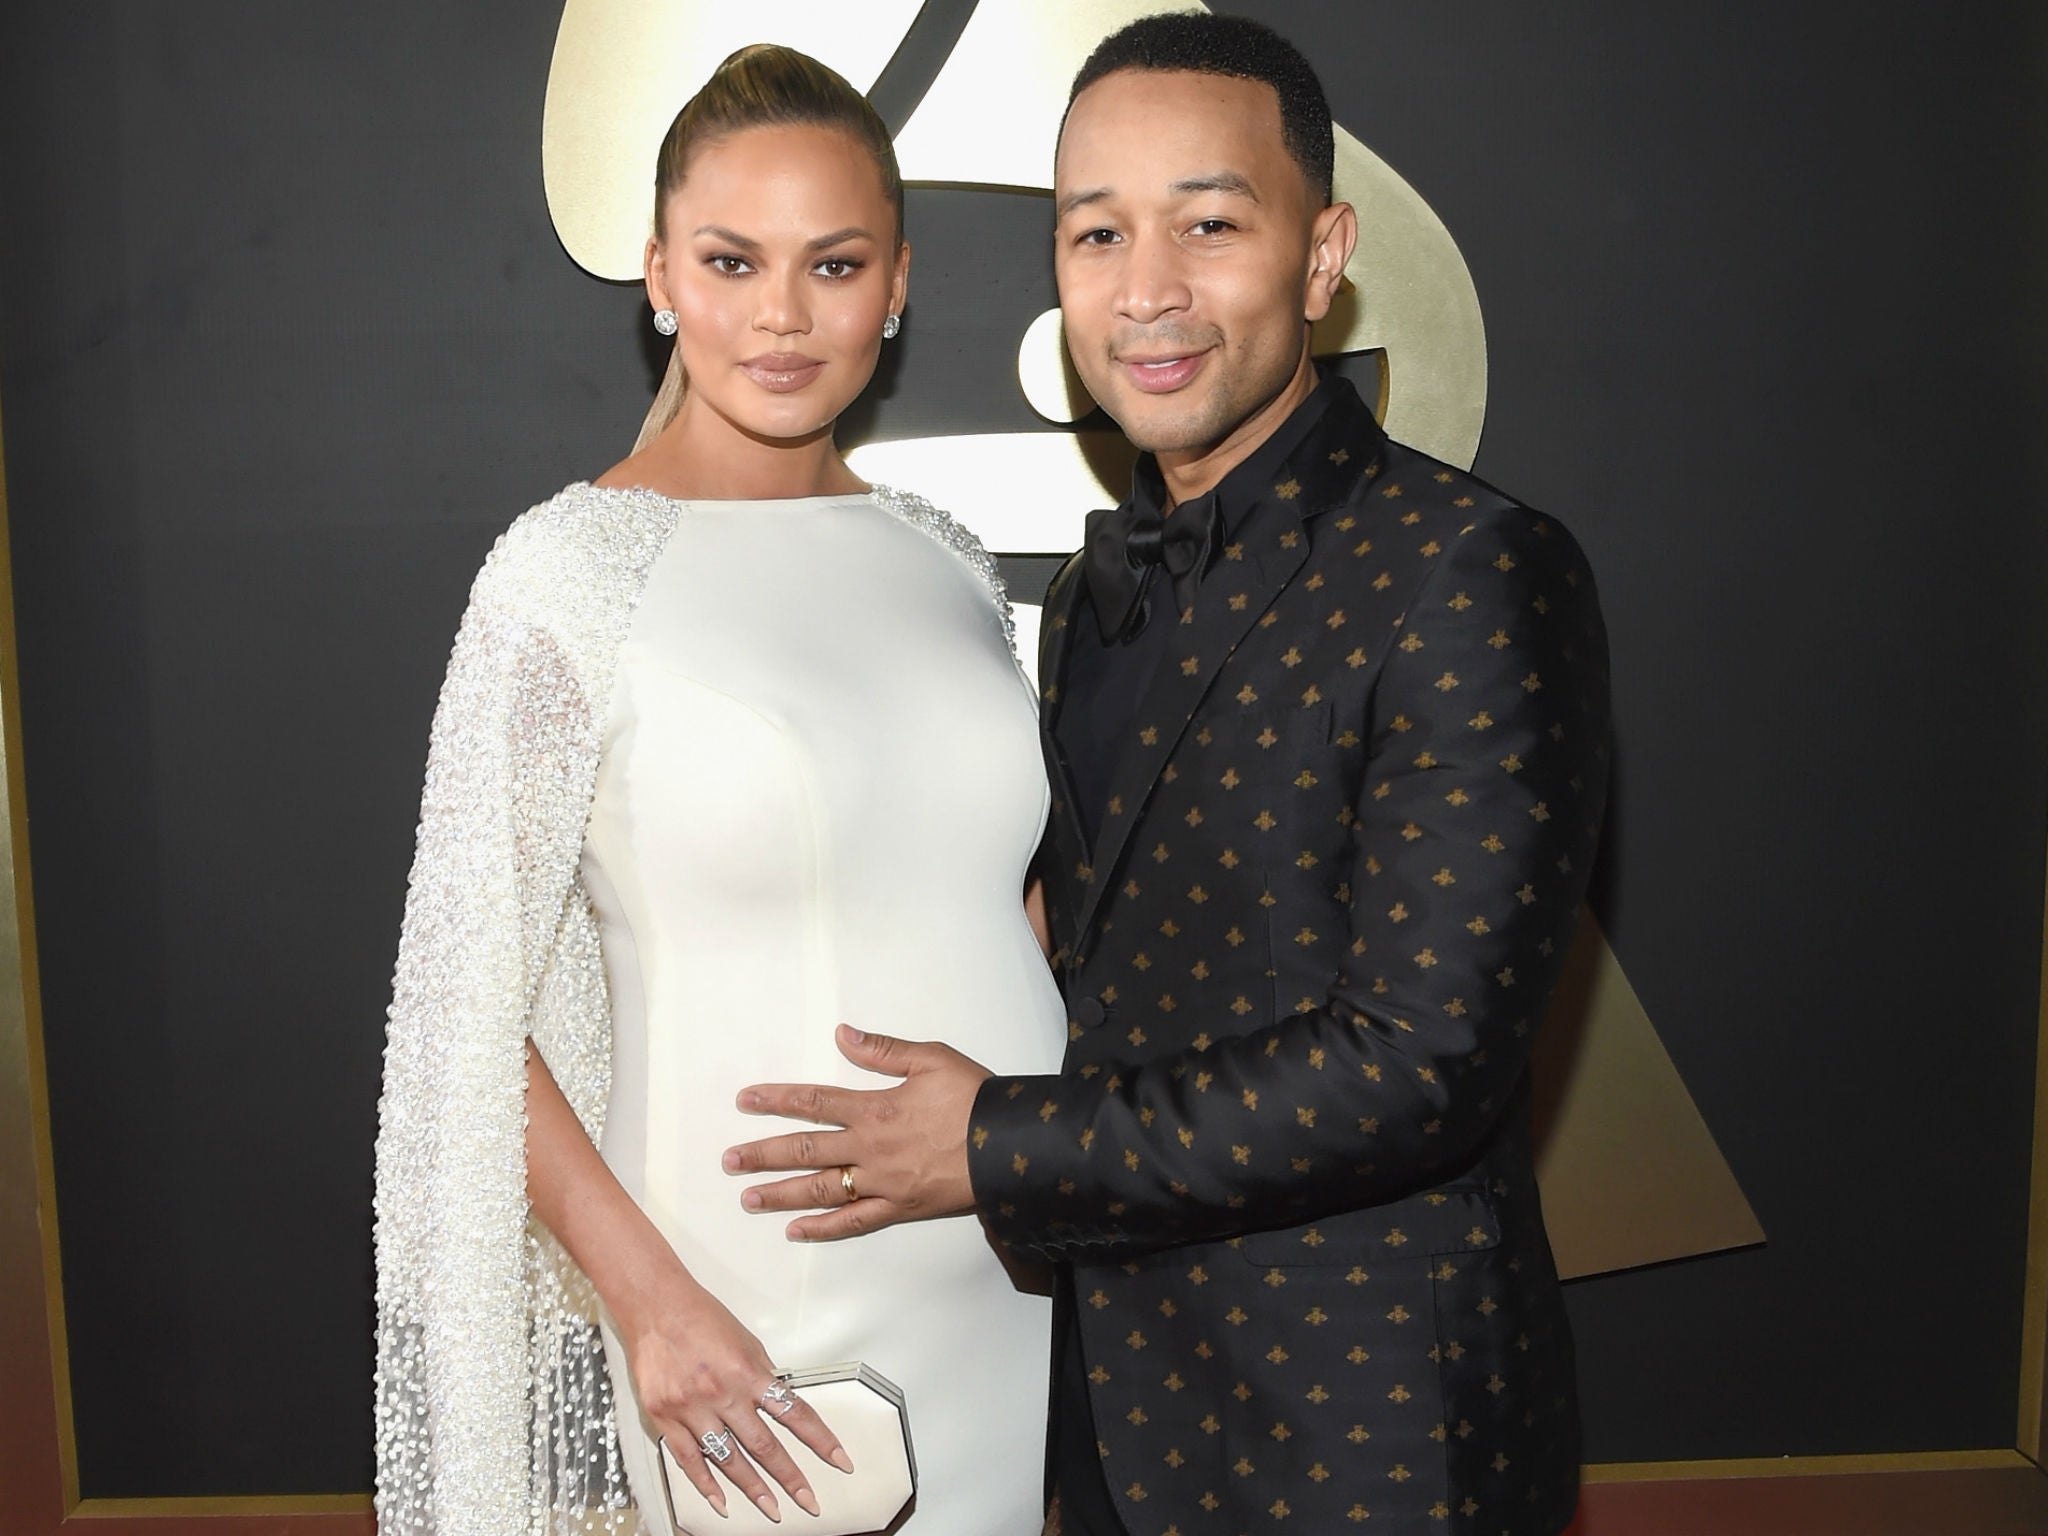 Beby Andreap Xxx - Chrissy Teigen defends selecting gender of her baby during IVF ...